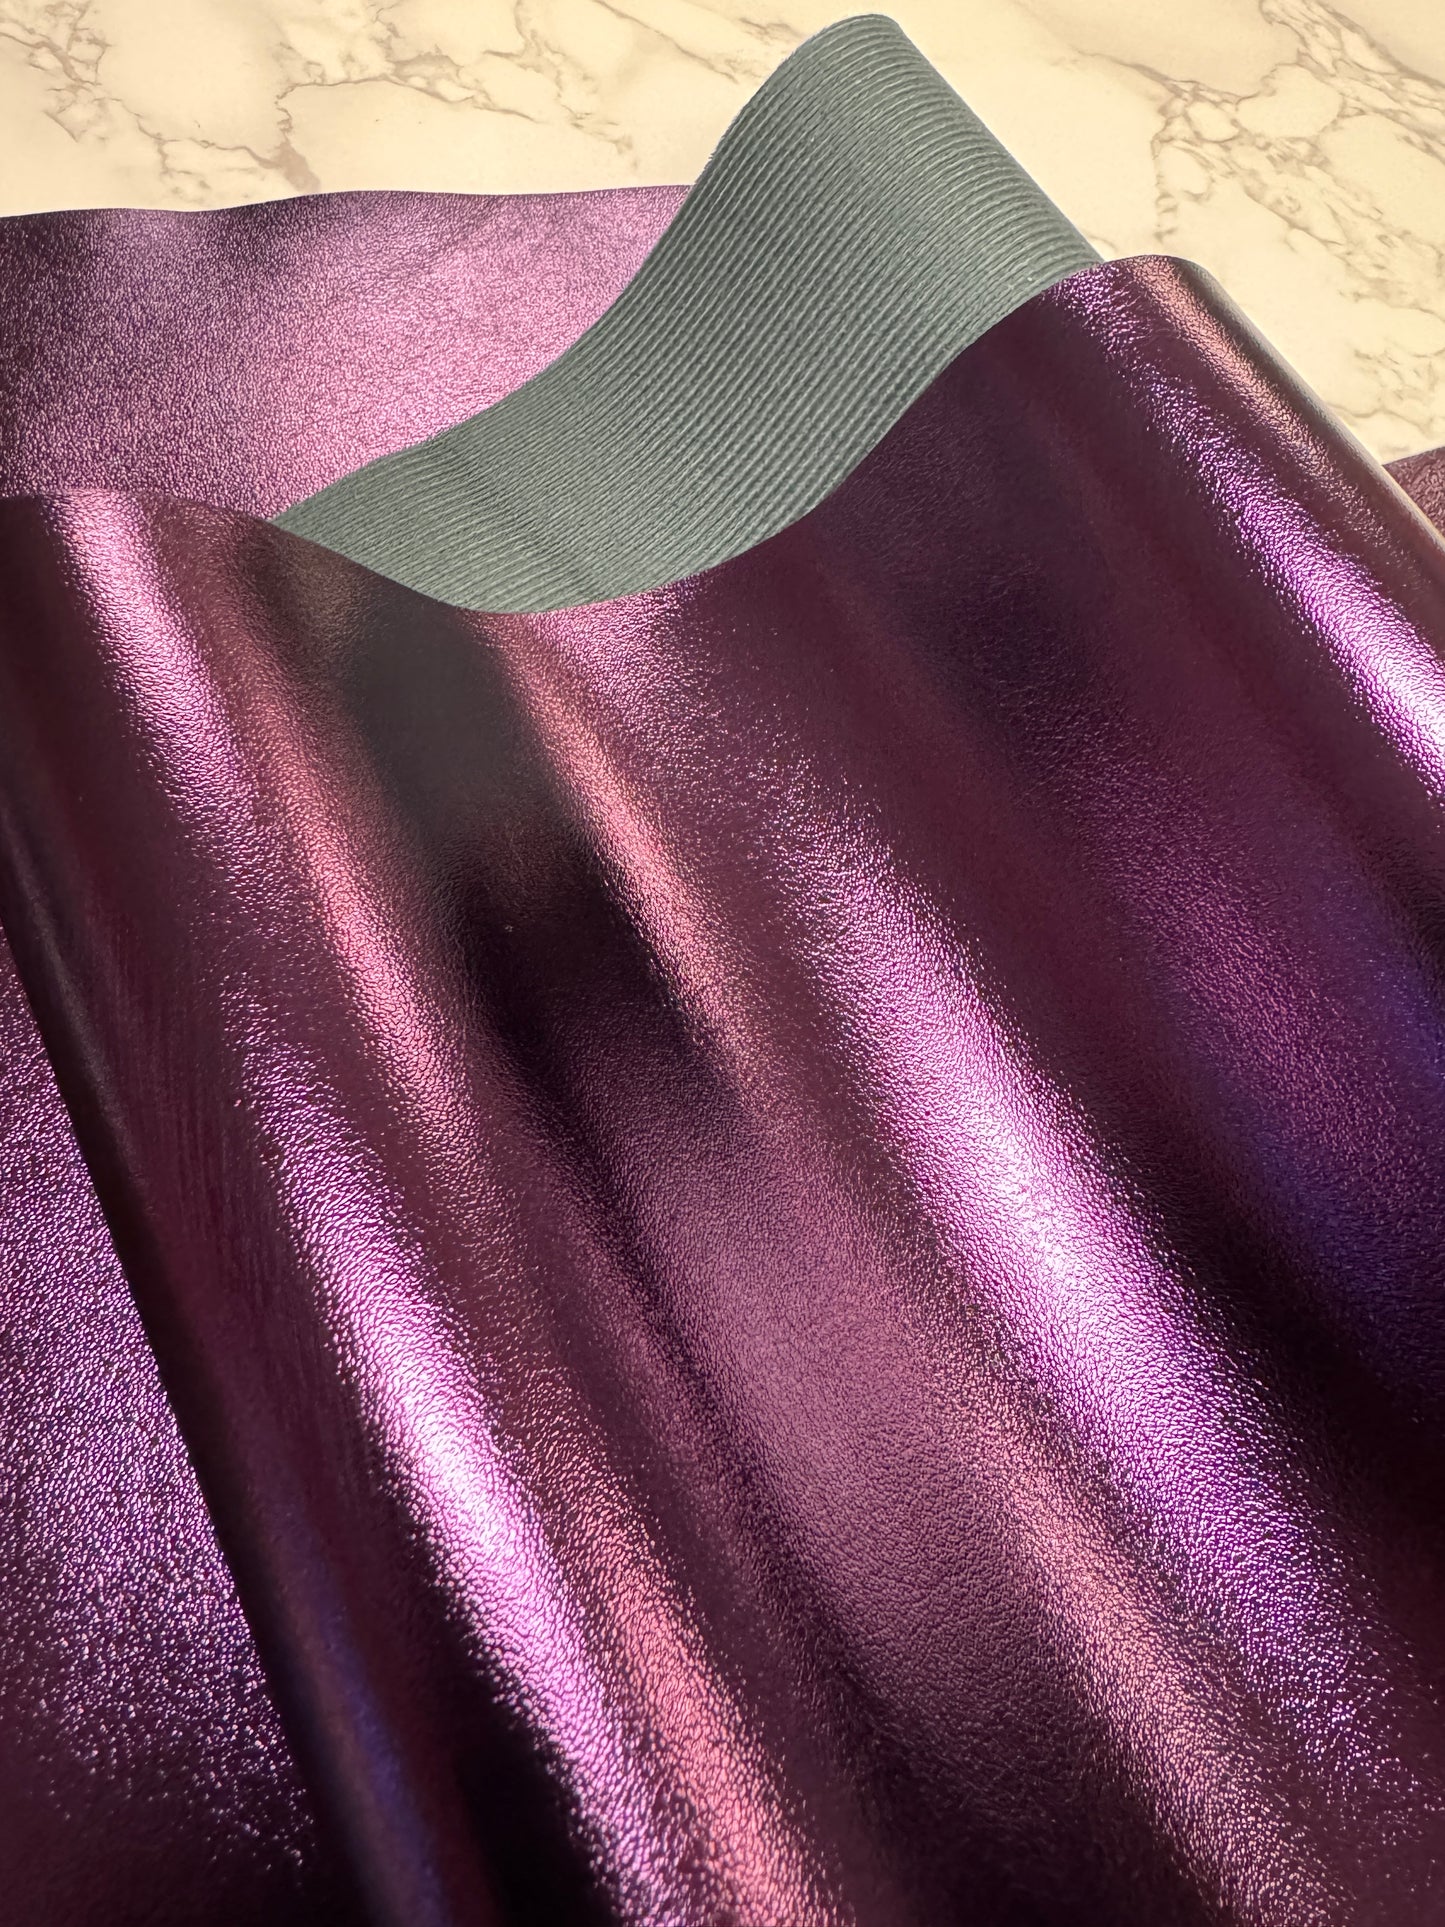 NEW Magical Purple smooth faux leather